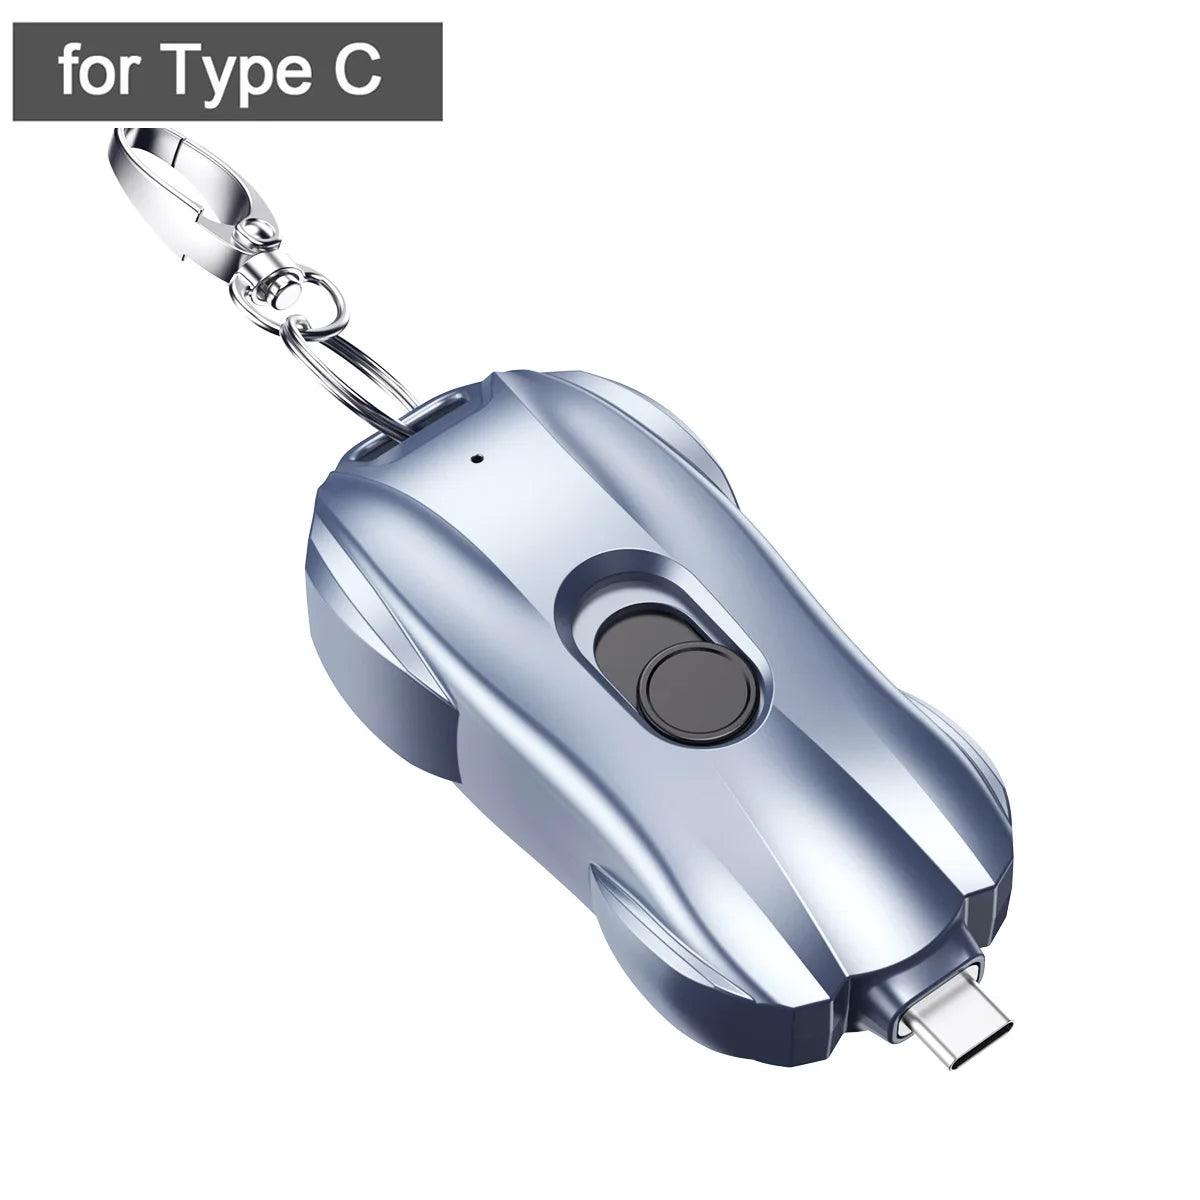 Keychain Portable Emergency Phone Charger Power Bank - THE TRENDZ HIVE 